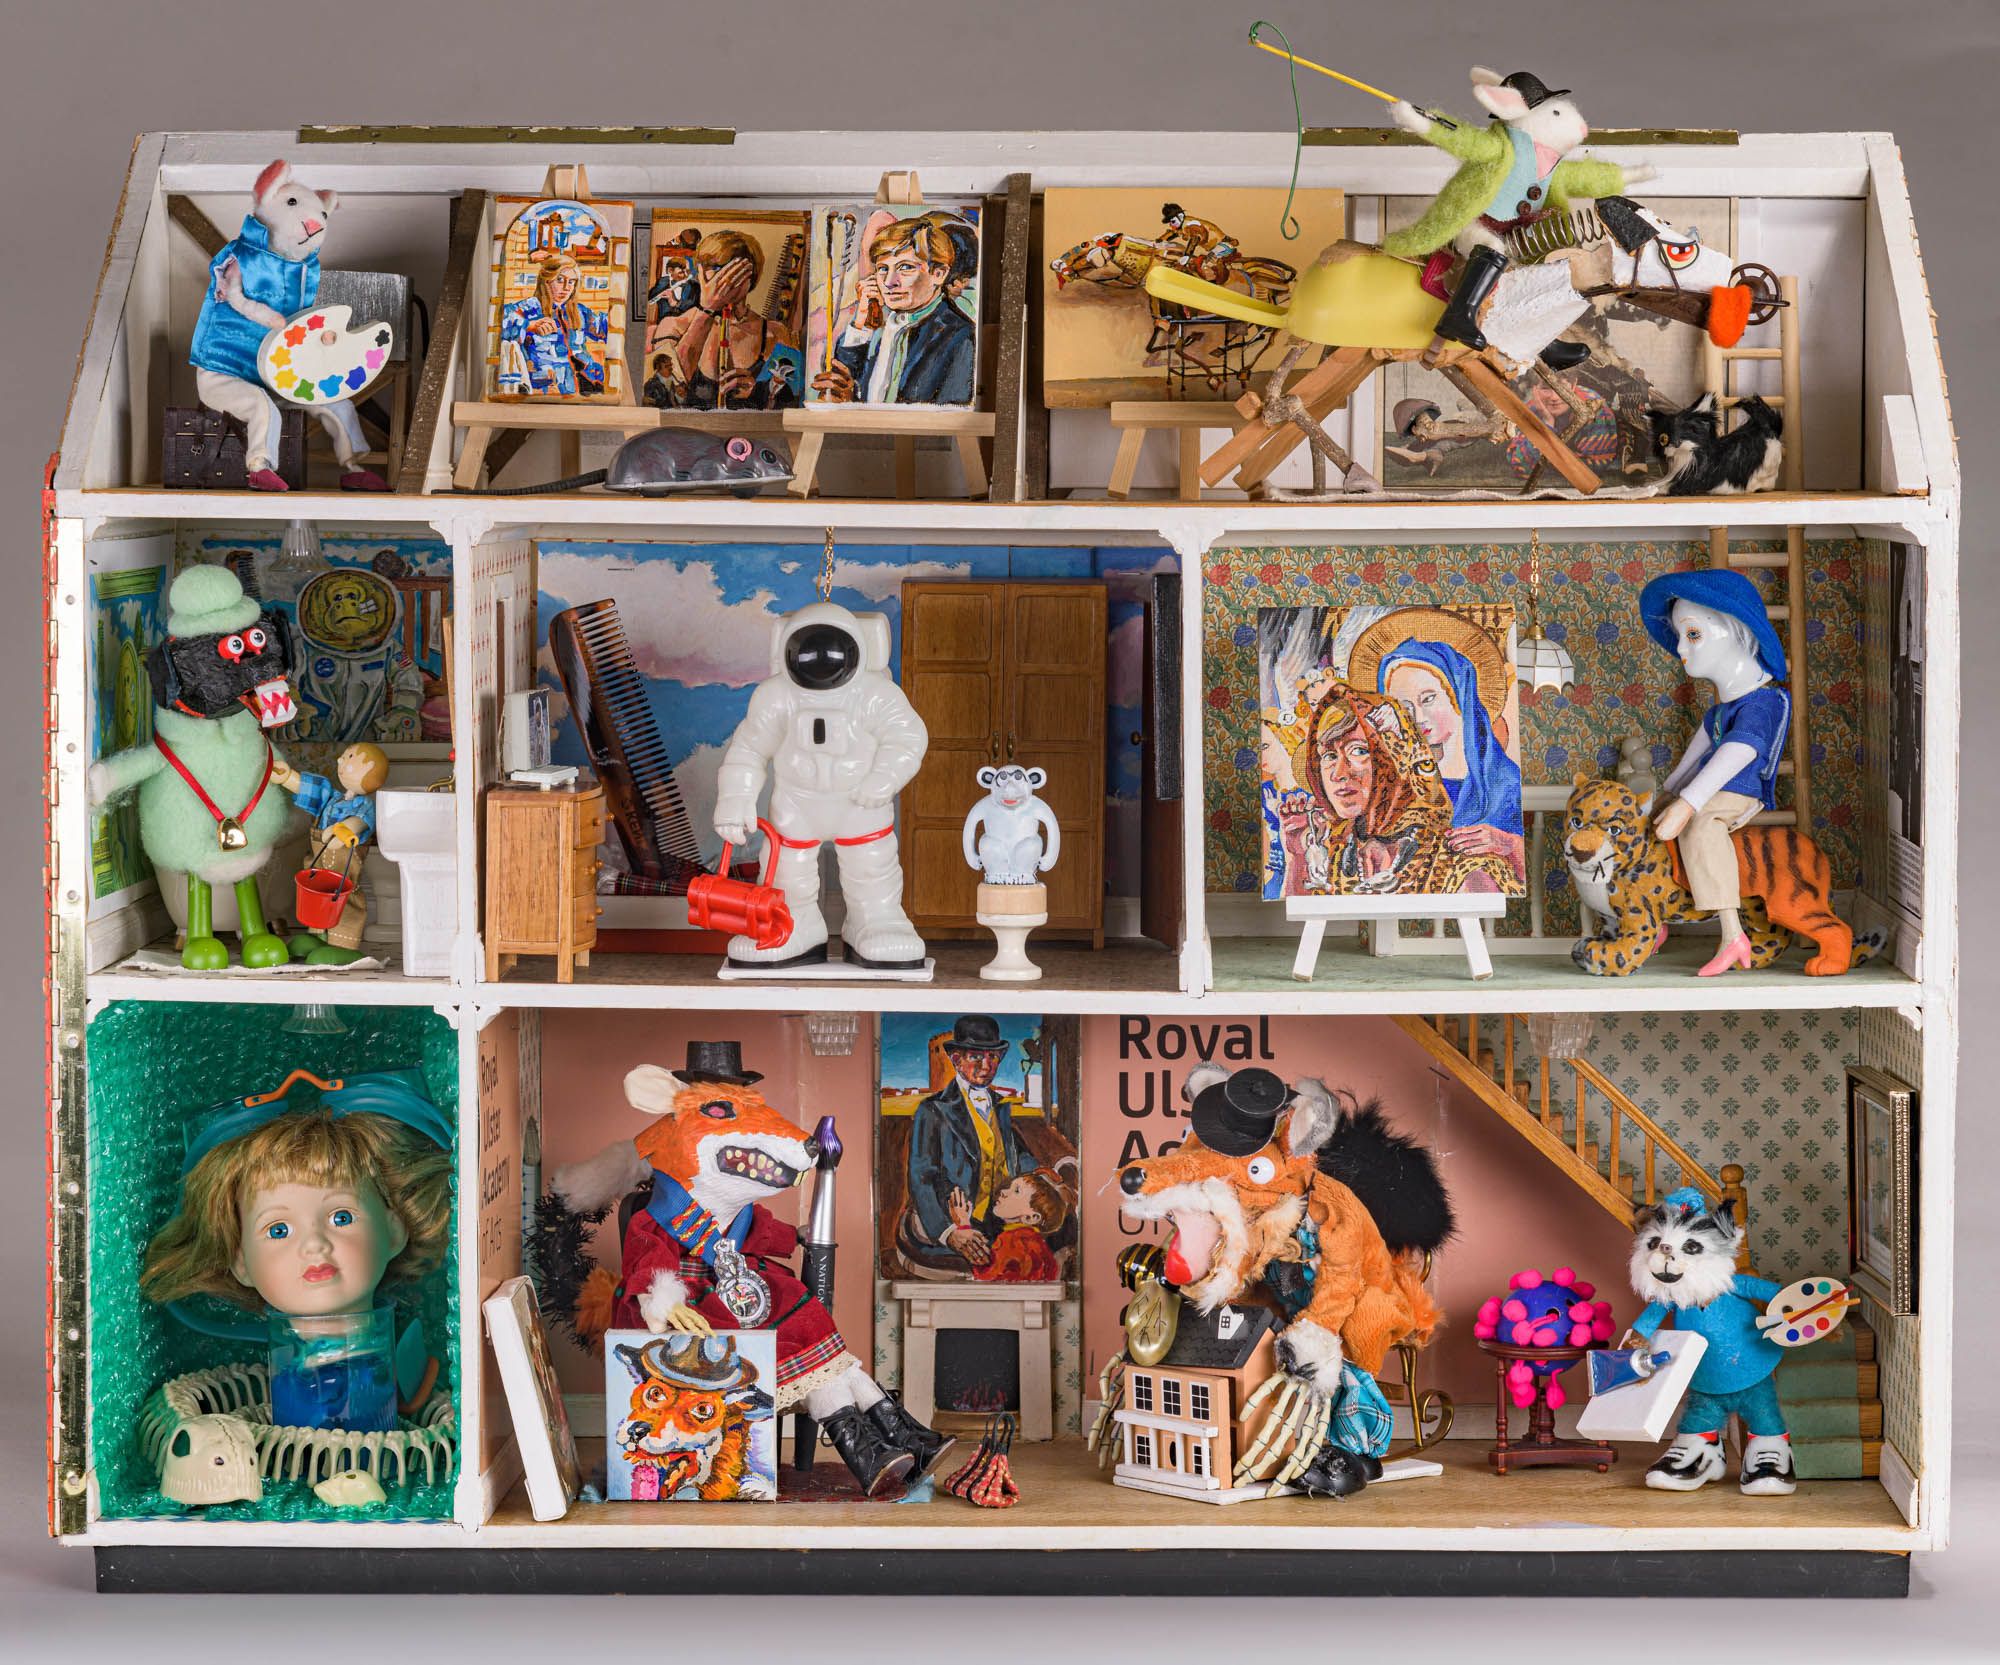 EXHIBITION: Betty Brown’s doll’s house is an innovative way to stage a retrospective  and can be viewed at the RUA exhibition which has opened in the Ulster Museum and runs to January 3, 2023